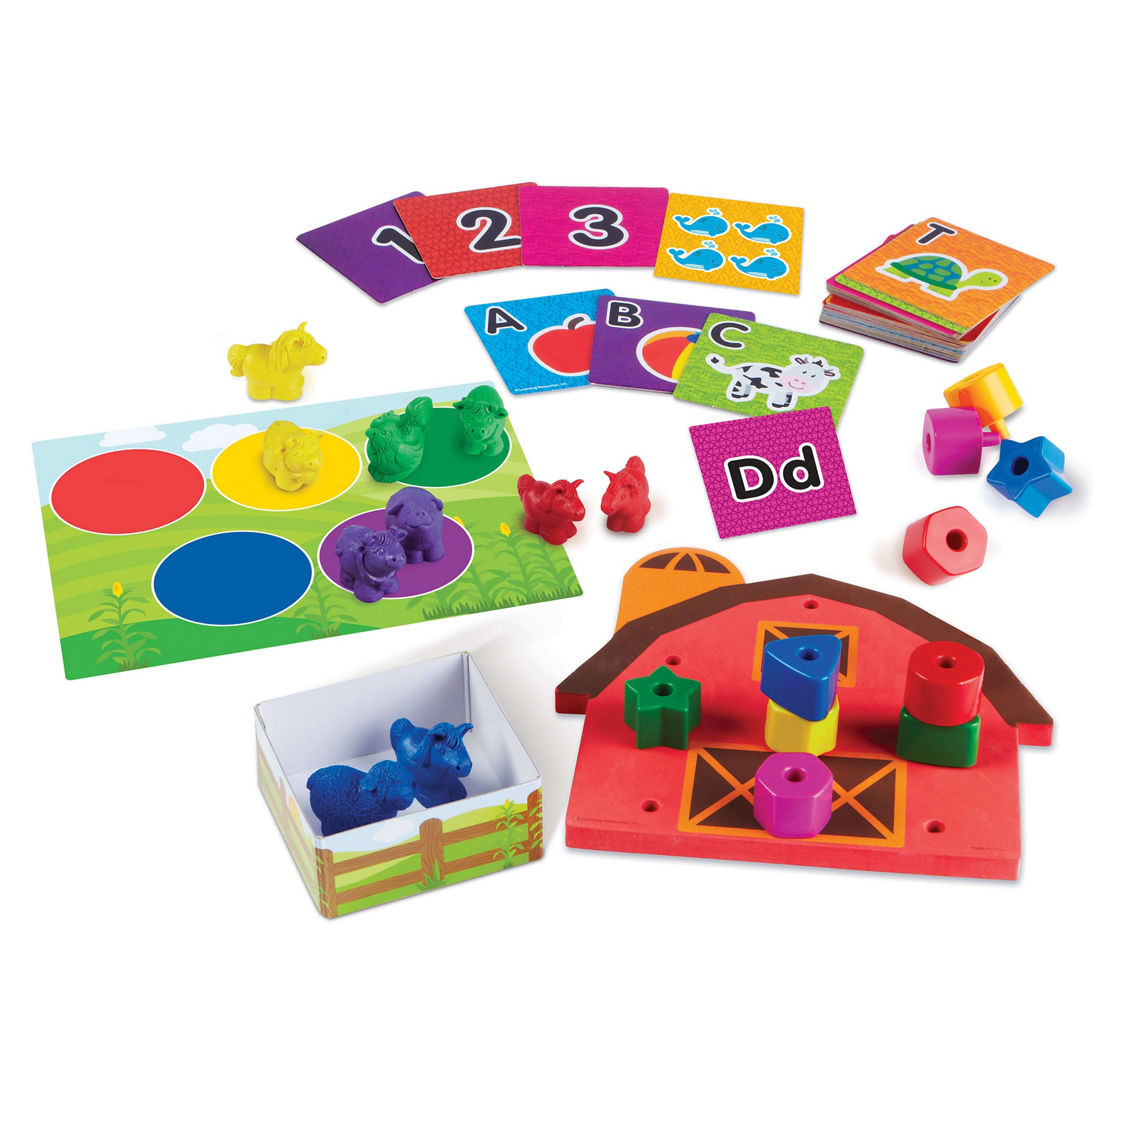 Learning Resources Learning Essentials - All Ready for Toddler Time Readiness Kit - Image 5 of 5